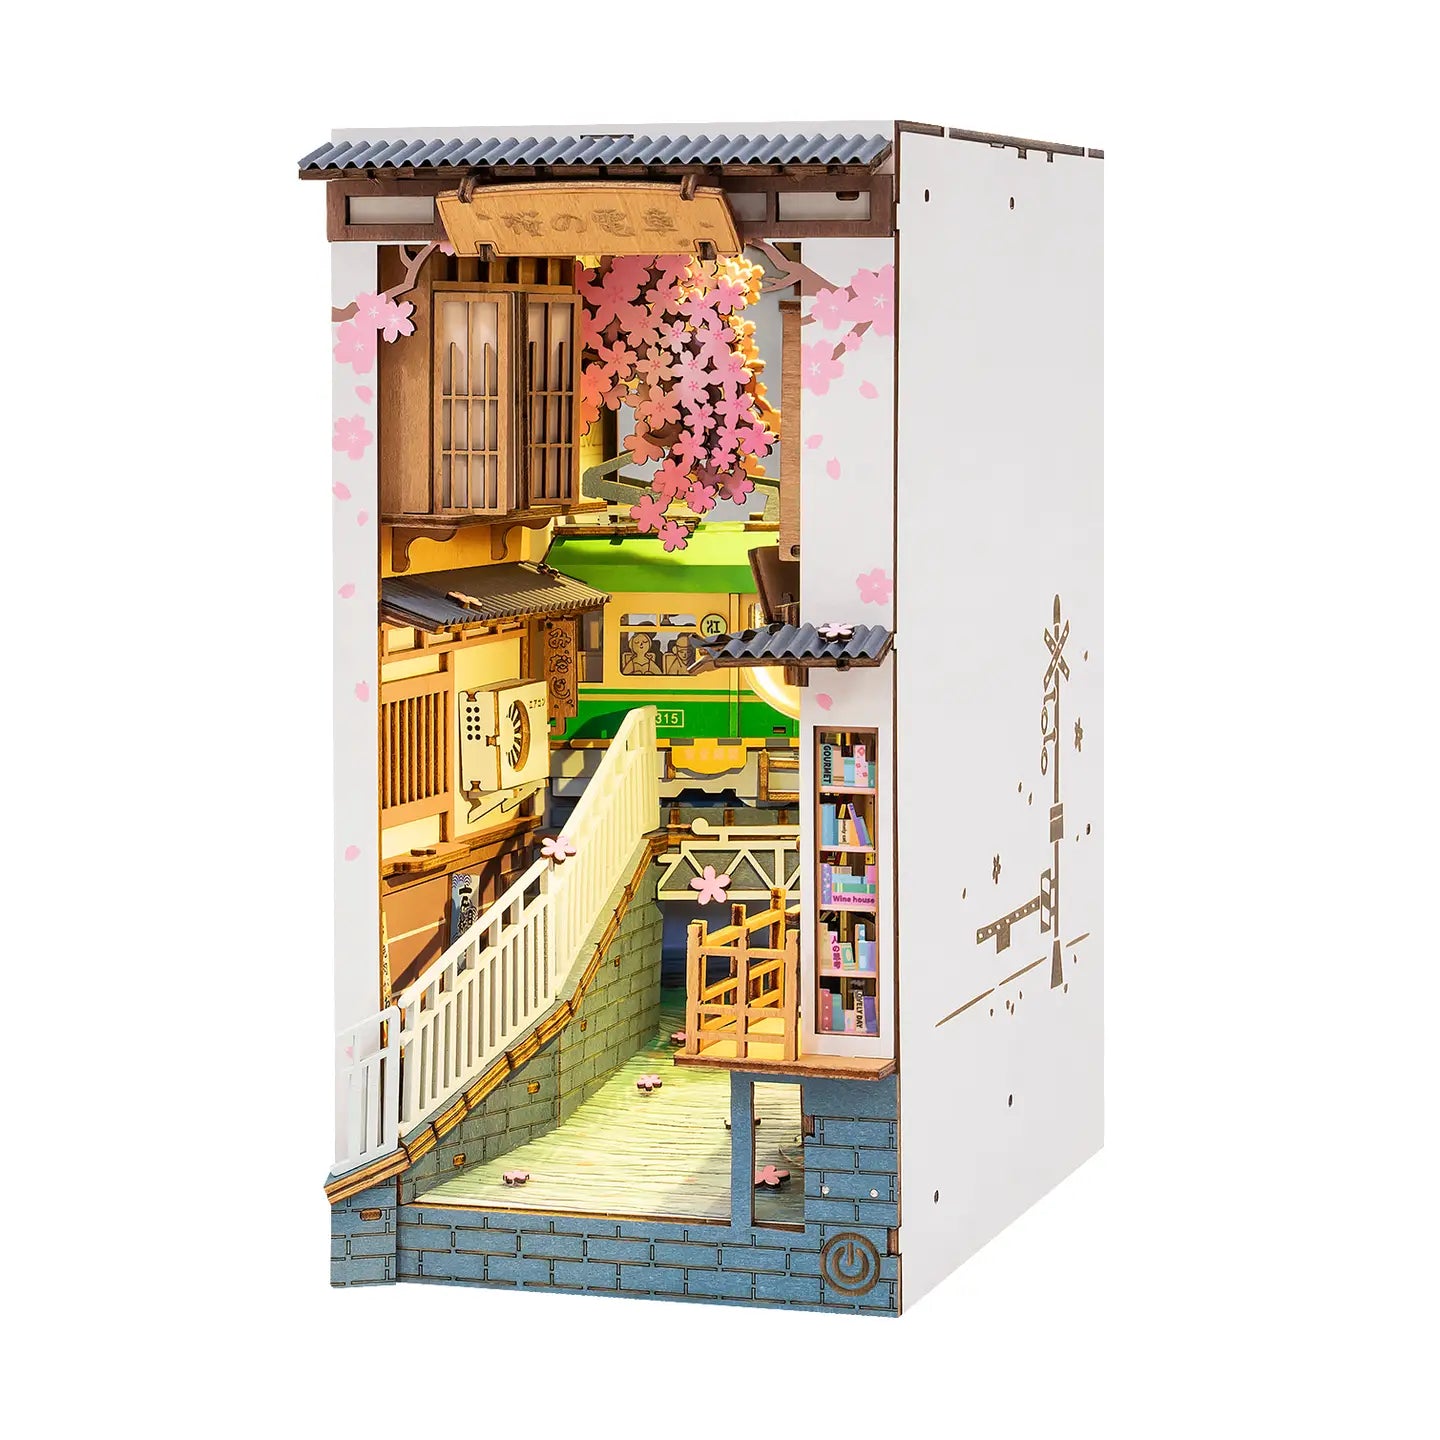 A miniature Sakura Tram Book Nook kit for adults, featuring a detailed house model with a staircase and bookcase, ideal for art toy enthusiasts.